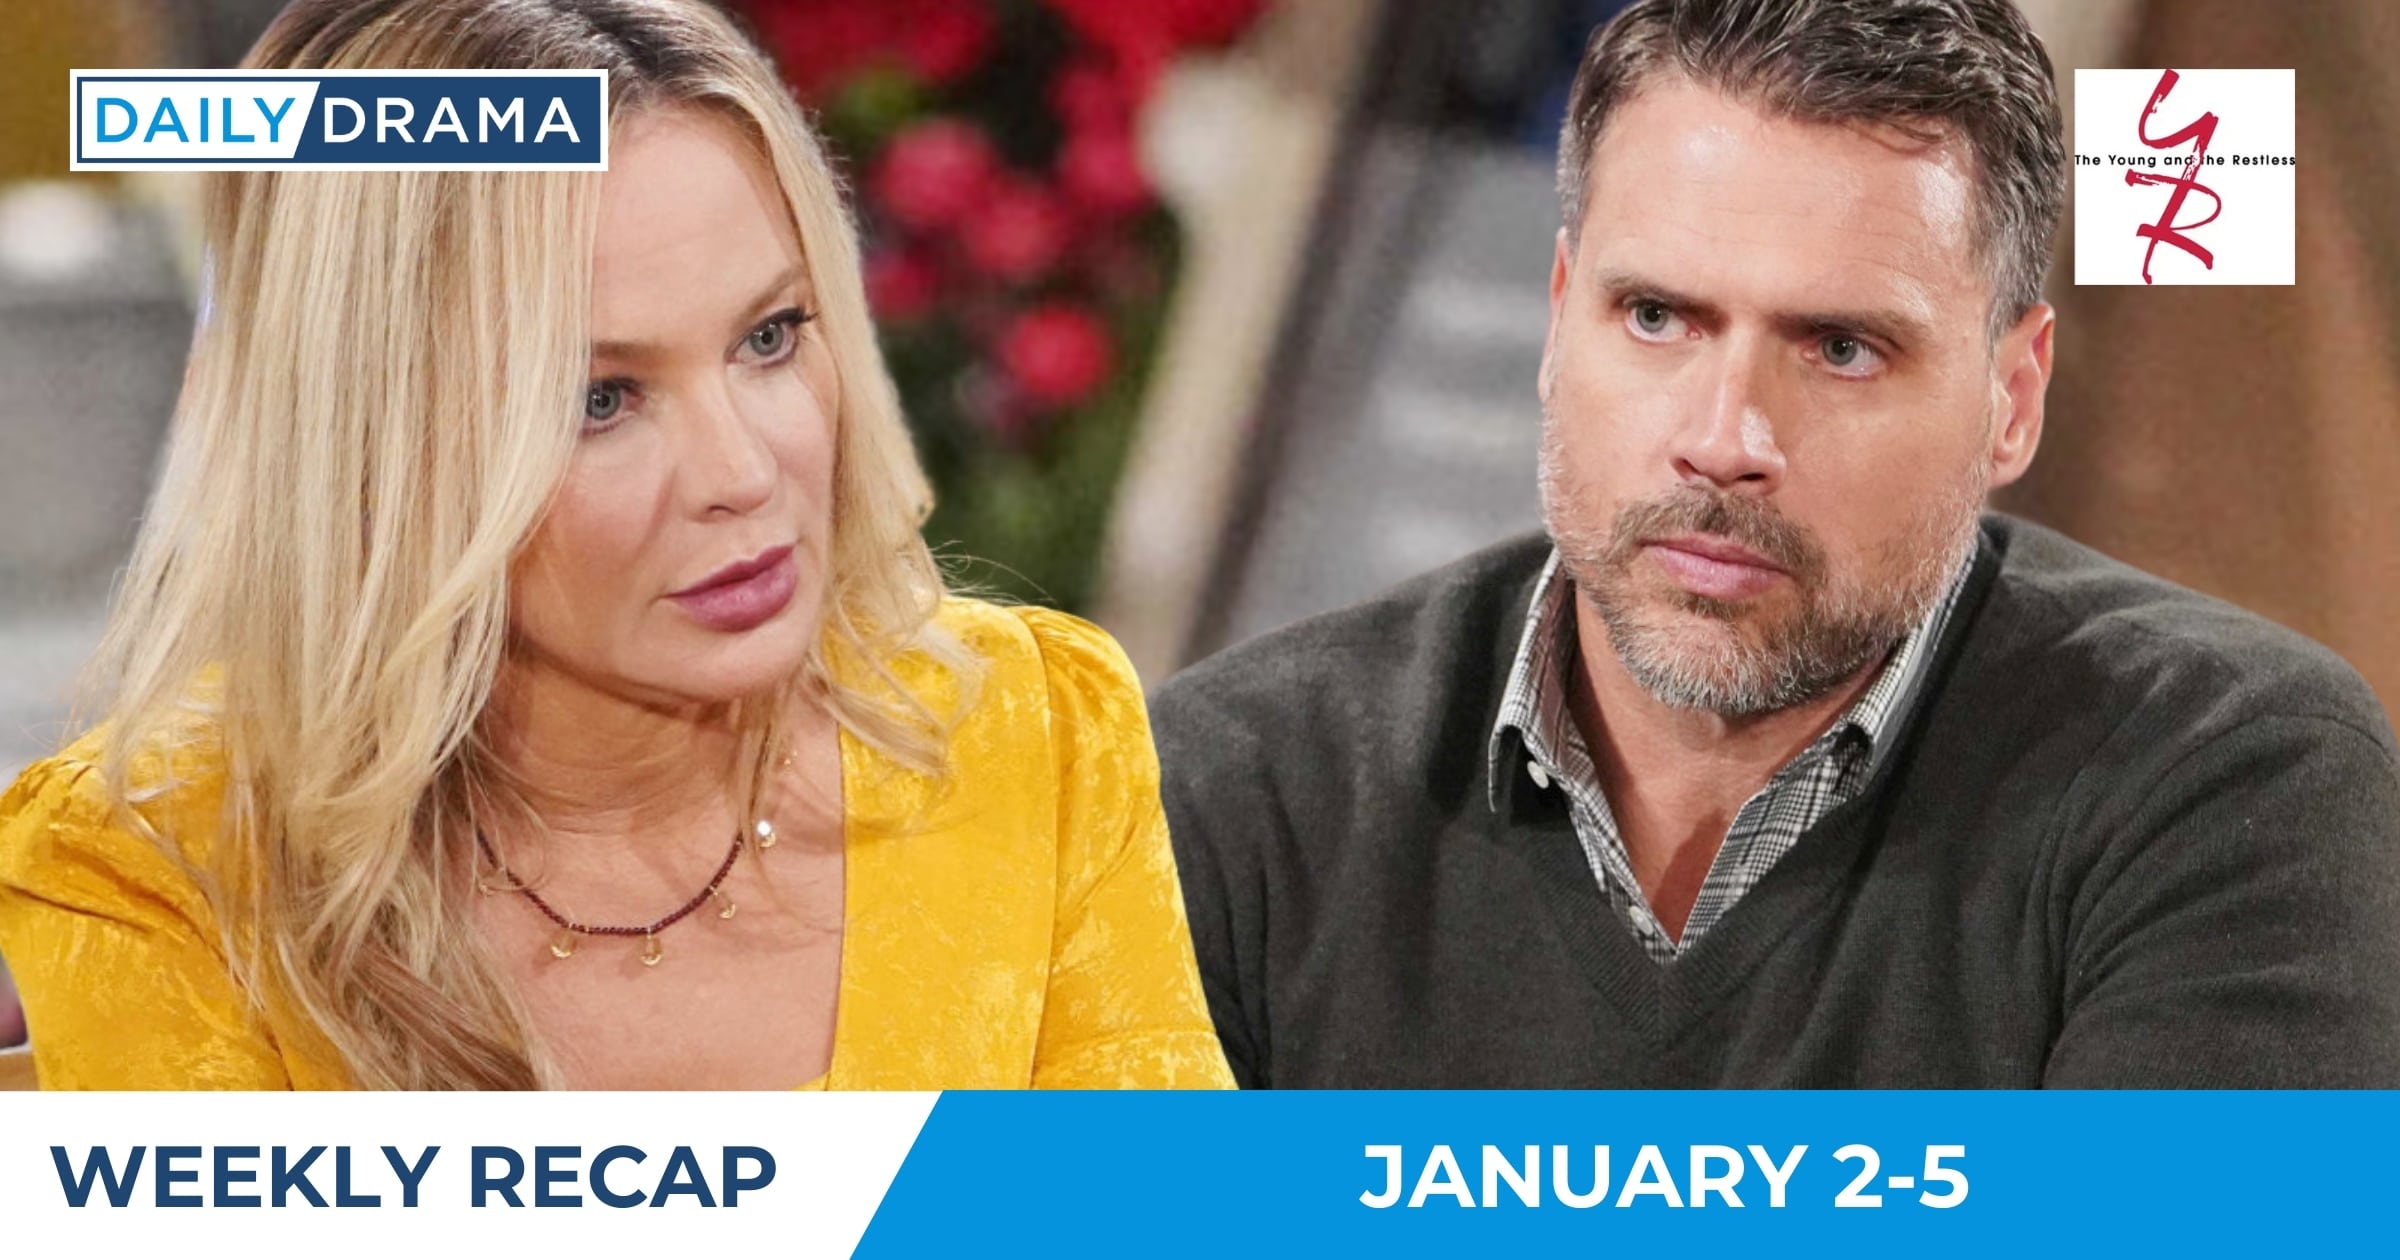 The Young and the Restless Weekly Recap - Jan 2-5 - Sharon and Nick